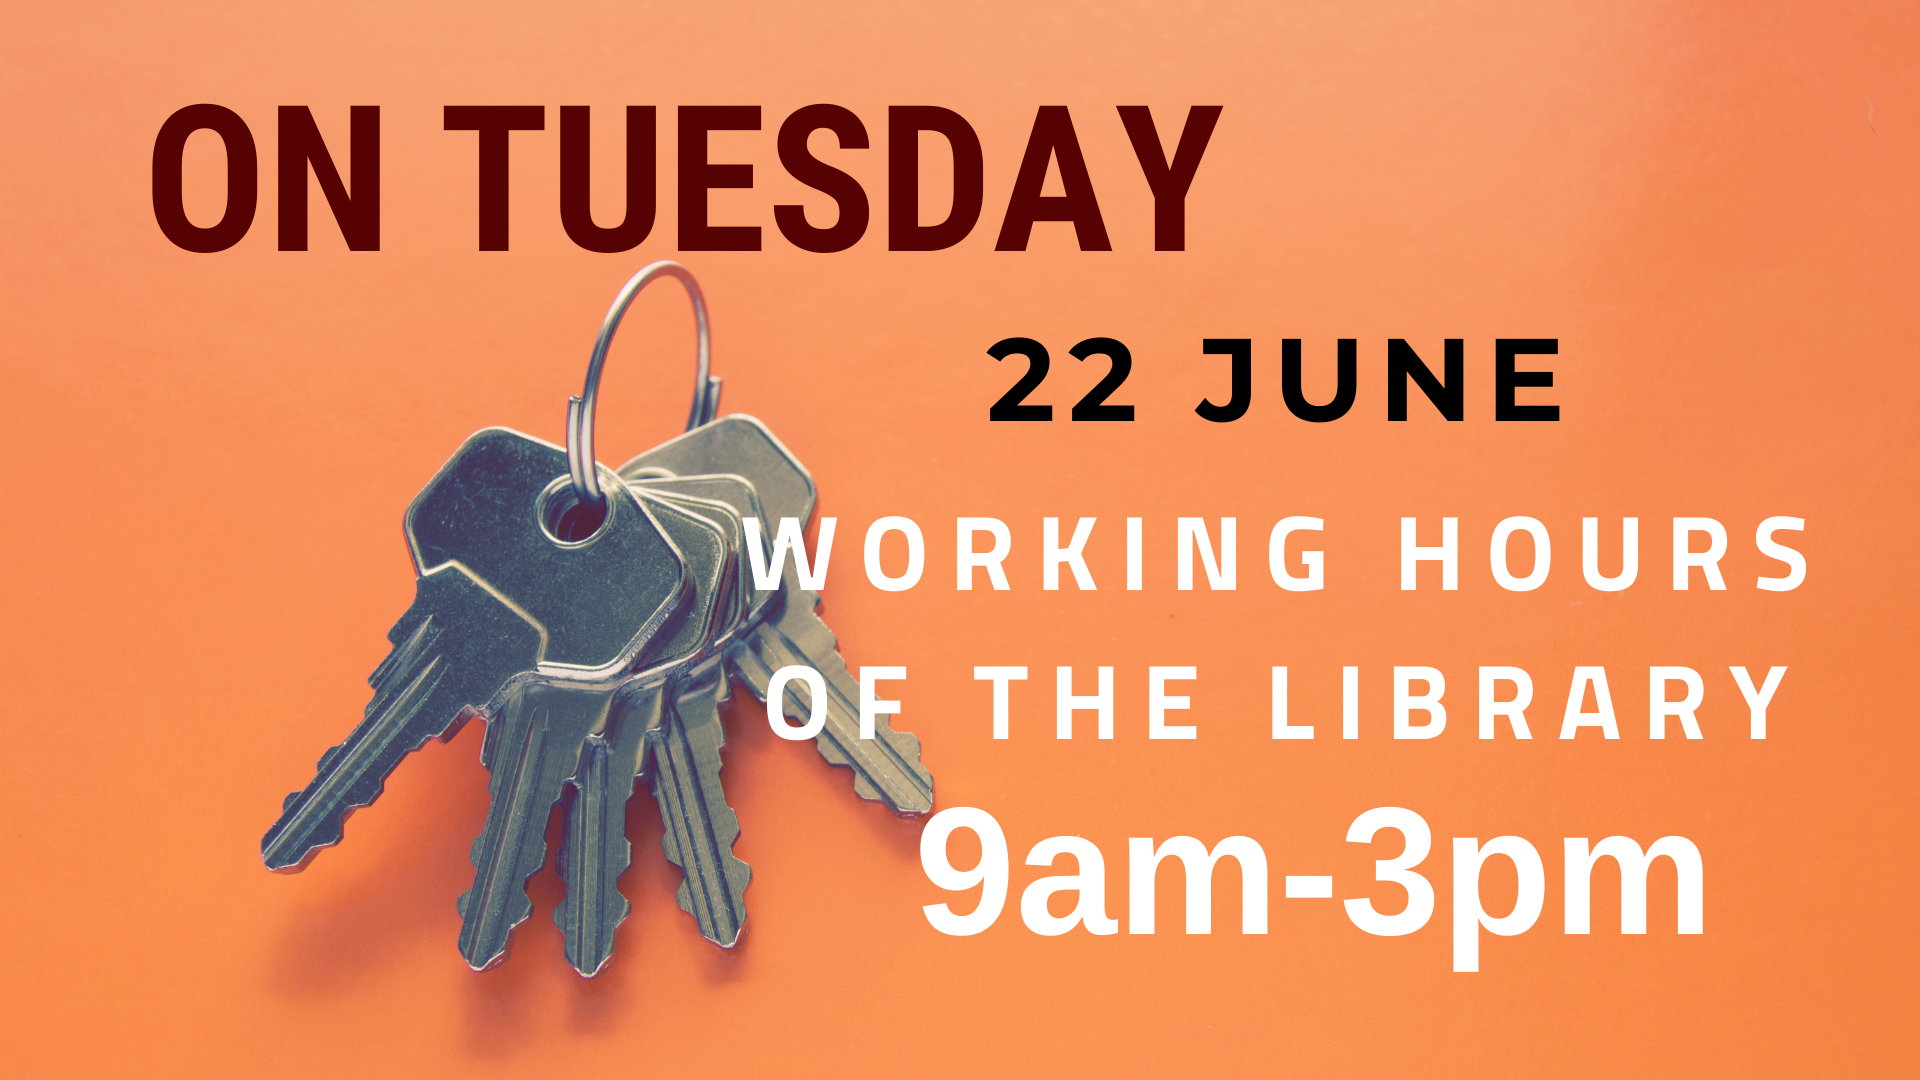 Fundamental Library of the Latvia University of Life Sciences and Technologies  working hours on Tuesday 22 June 9am-3pm